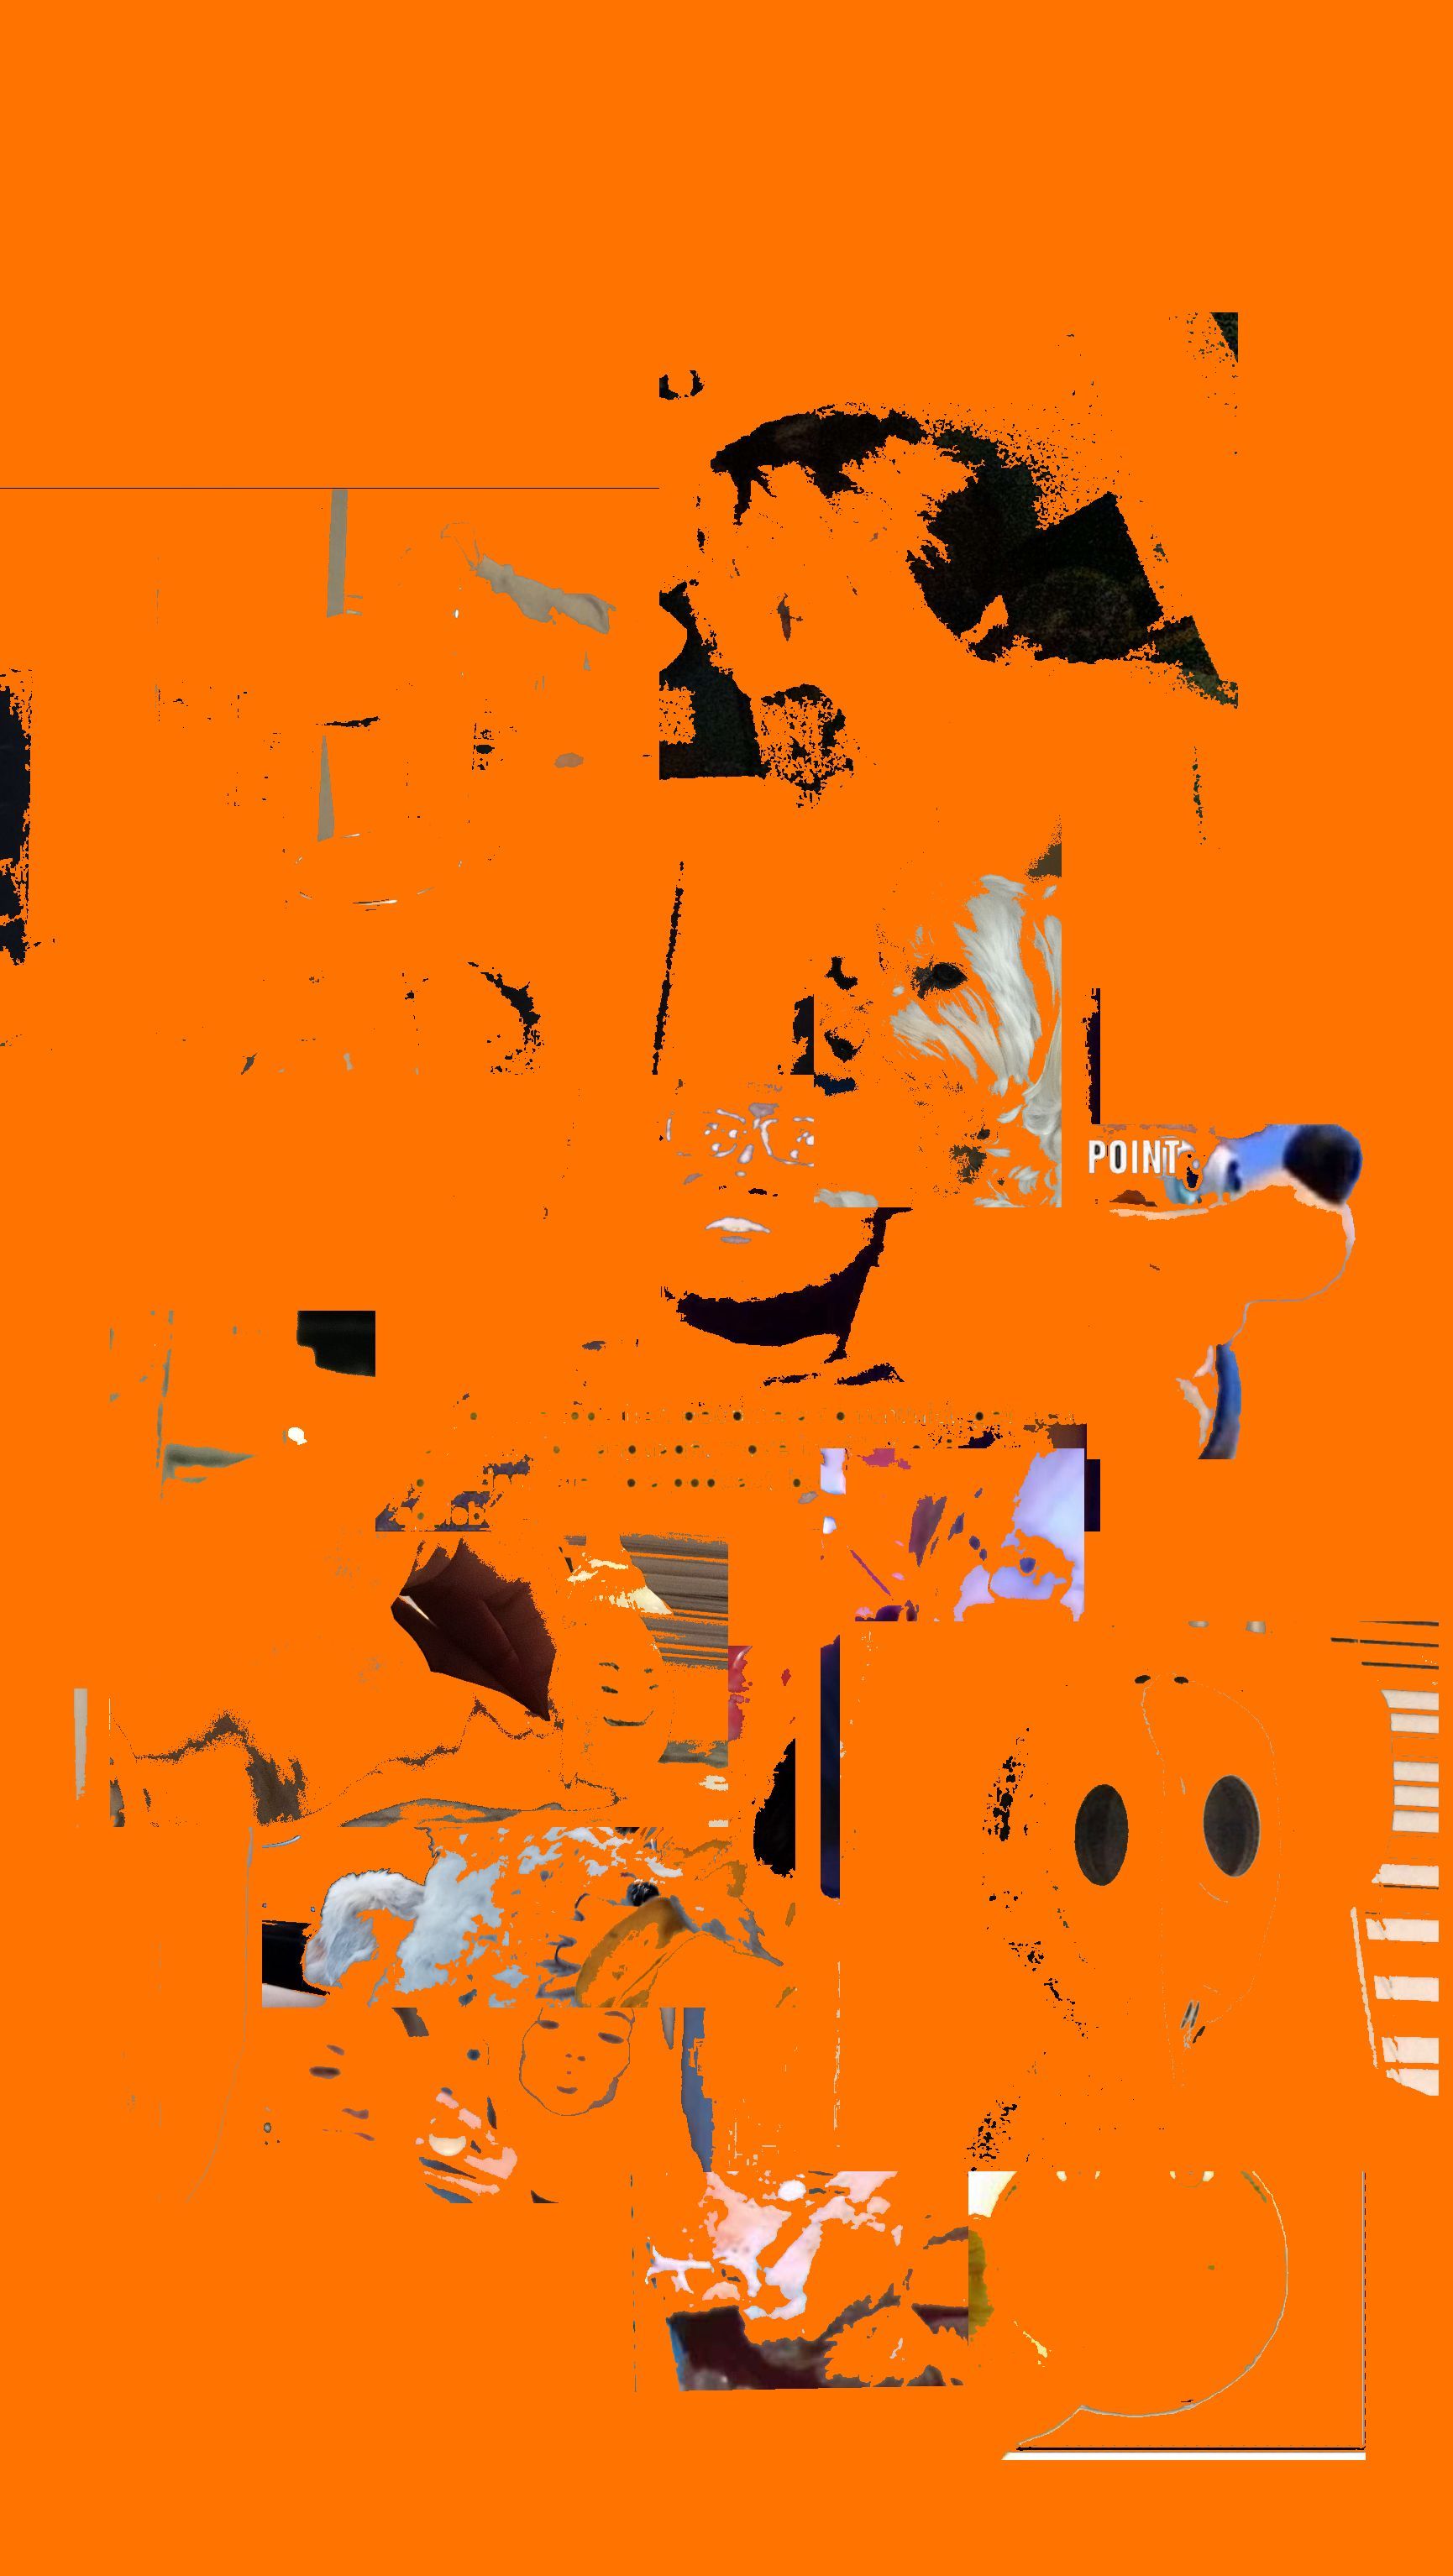 A digital artwork with a bright orange background and a collage of various shapes and lines. - Orange, grunge